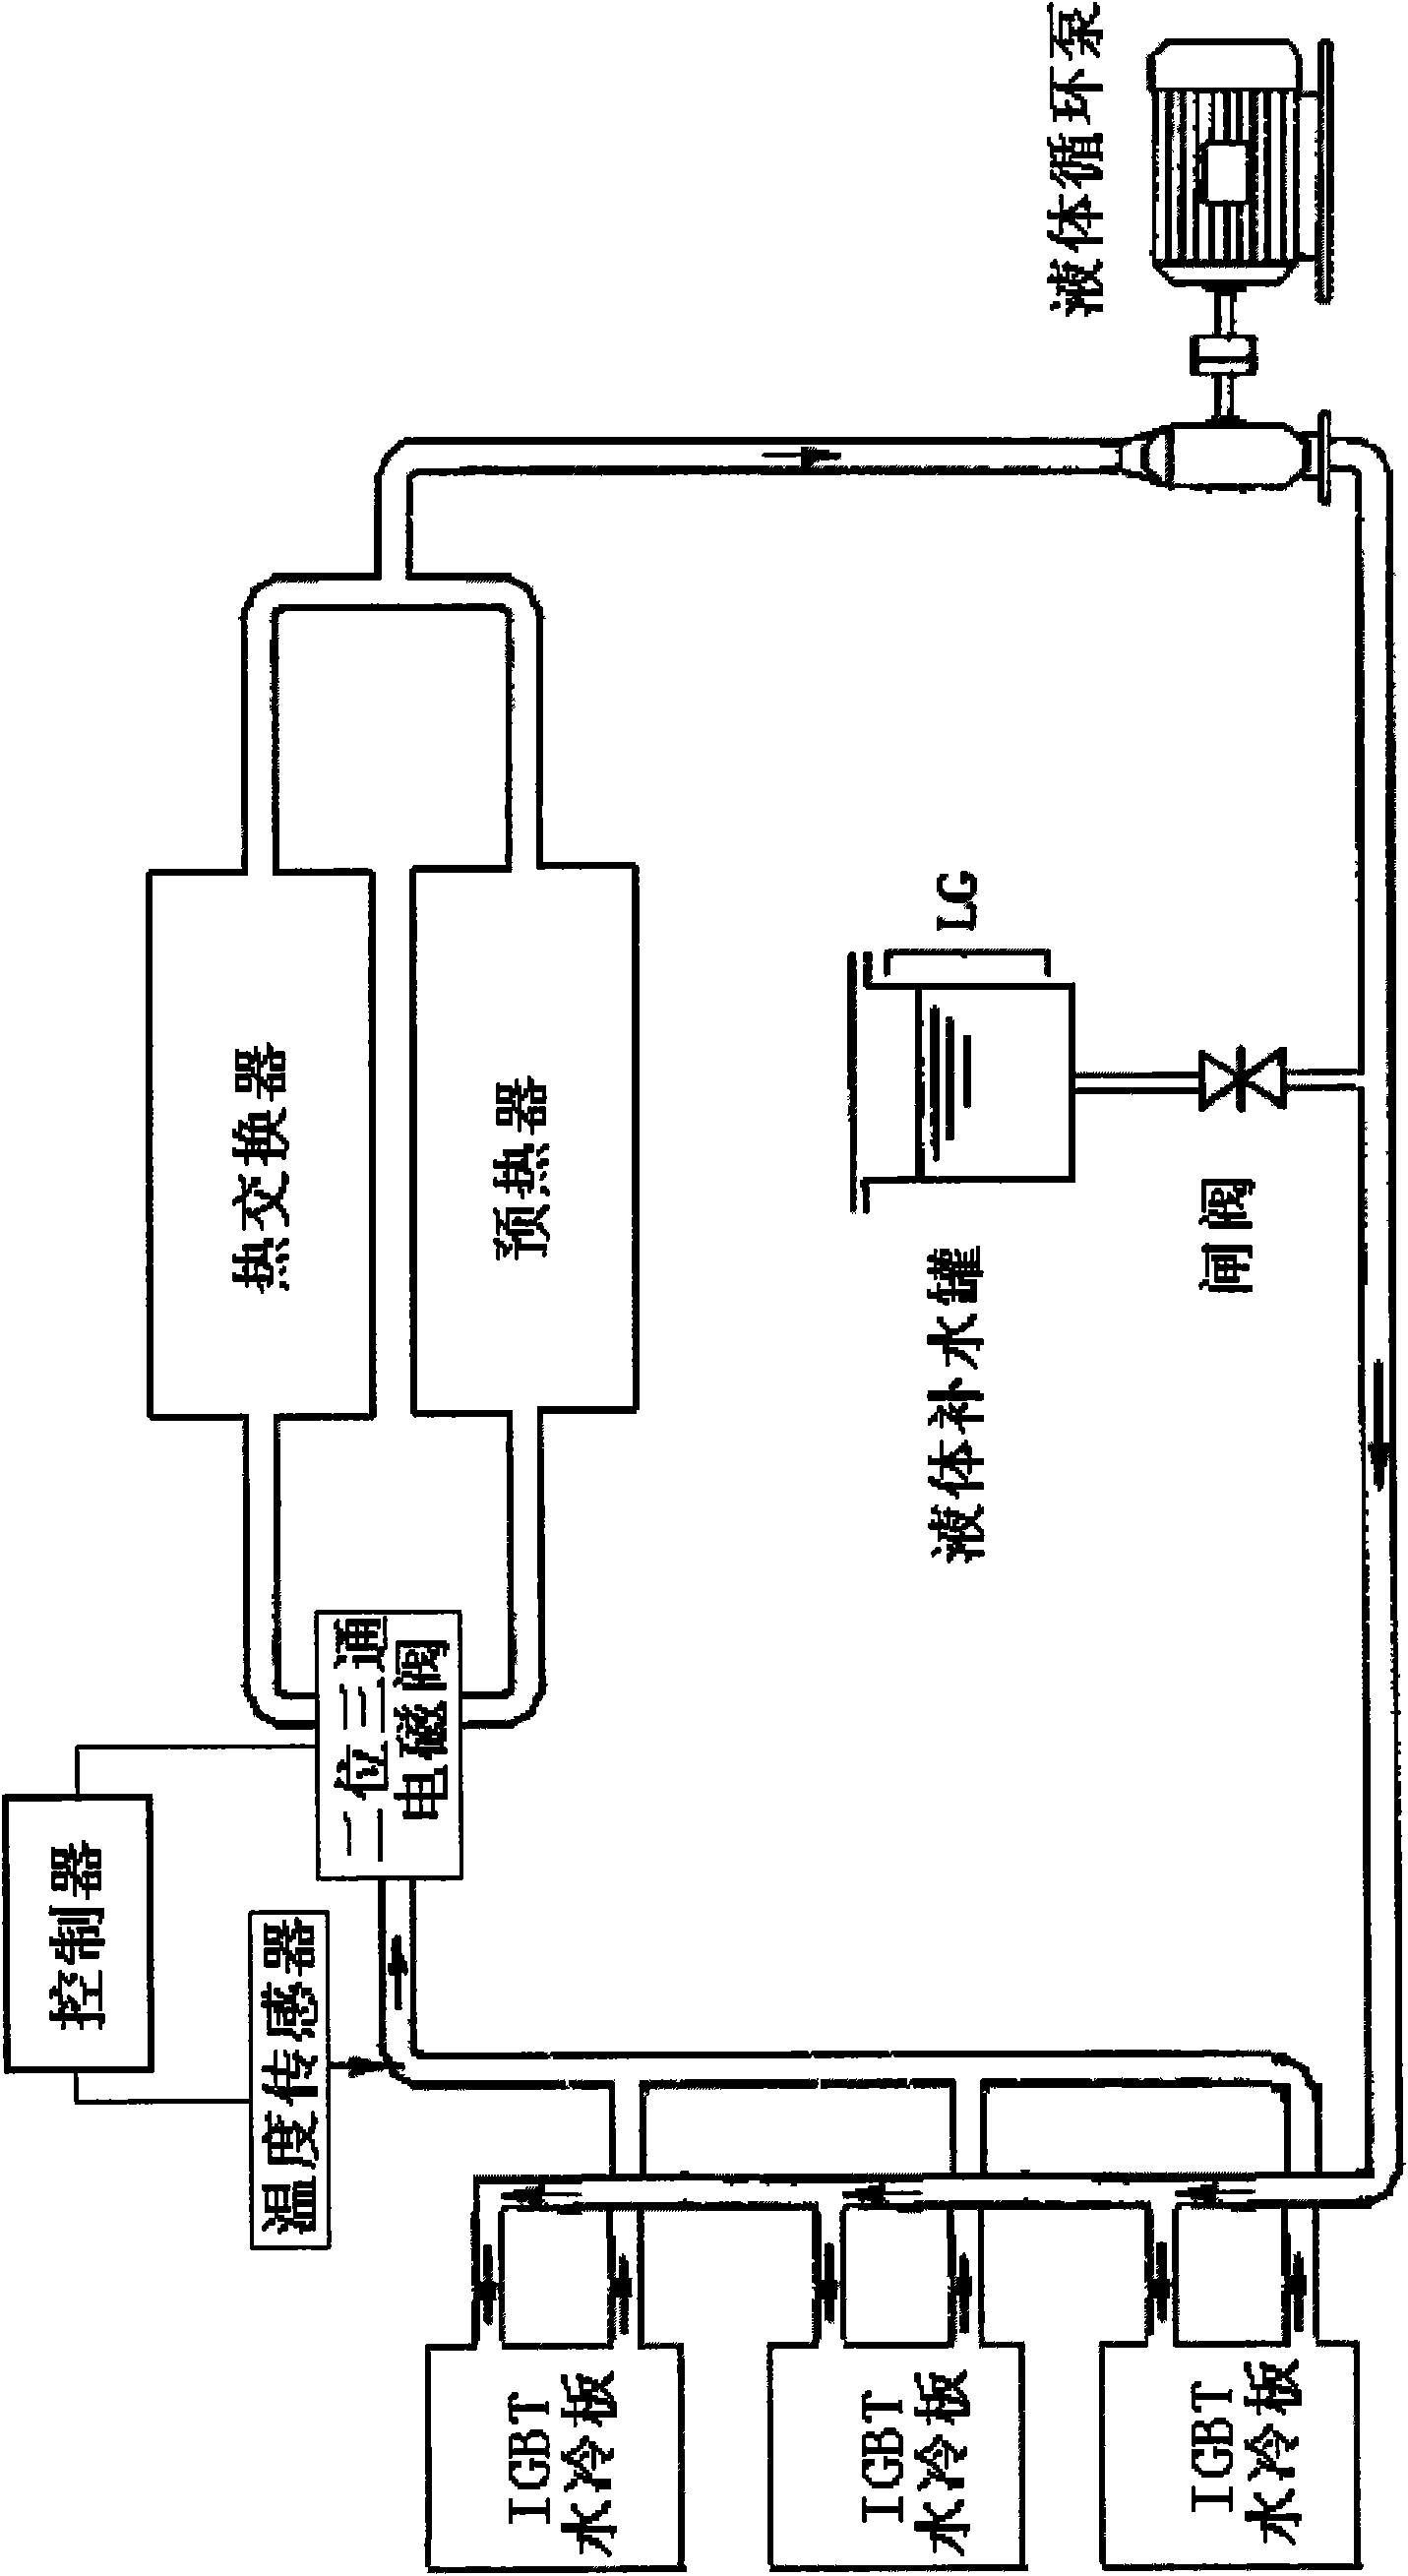 Working temperature control device for high-power power electronic device